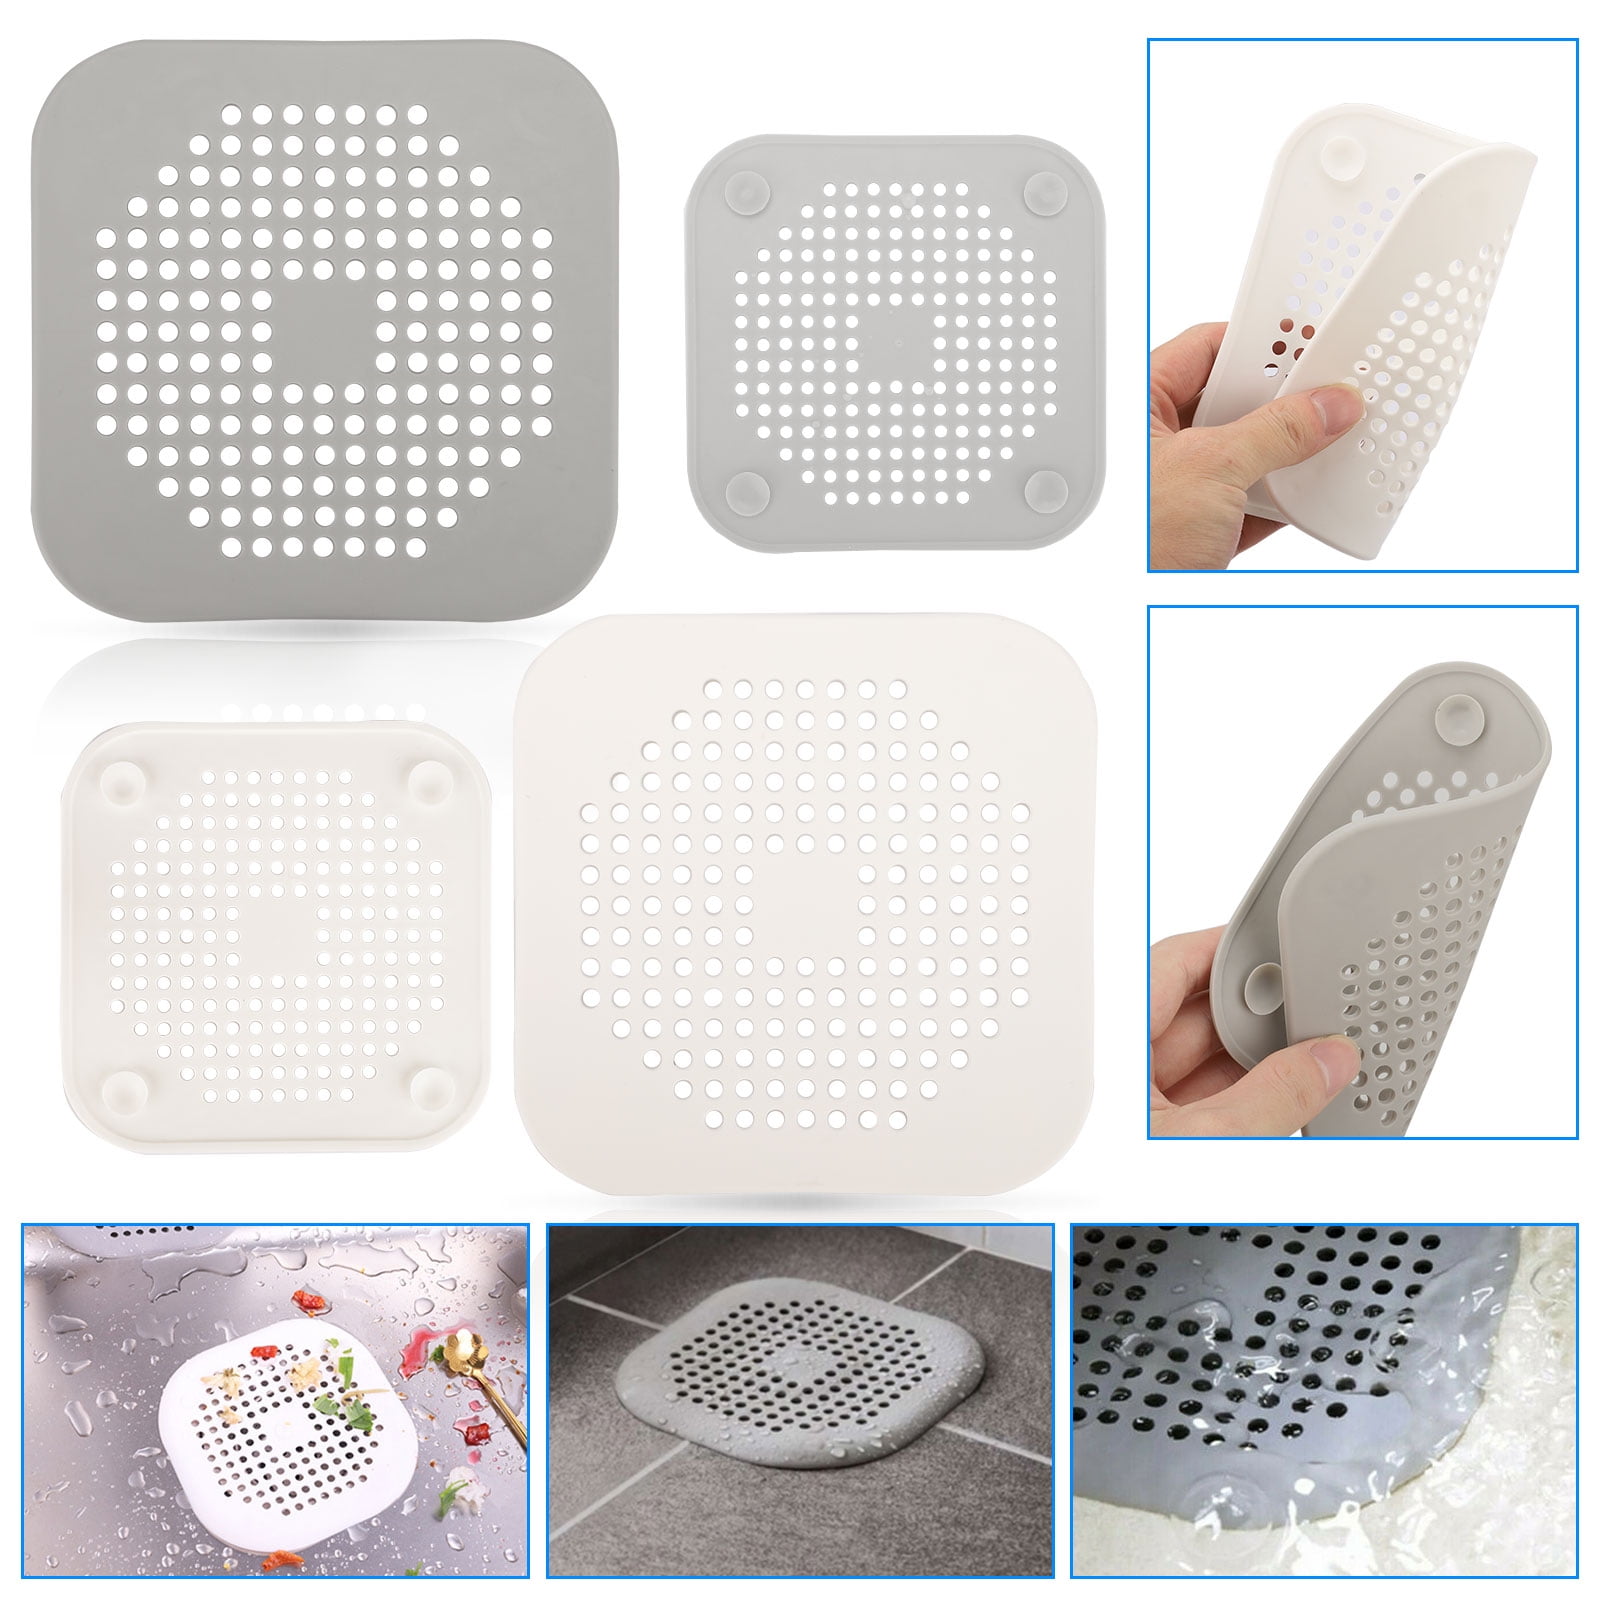 4 Pcs Starfish Shaped Rubber Sink Strainer Floor Drain Cover Hair Bath Catcher Stopper Rubber Shower Trap Basin Filter Cover